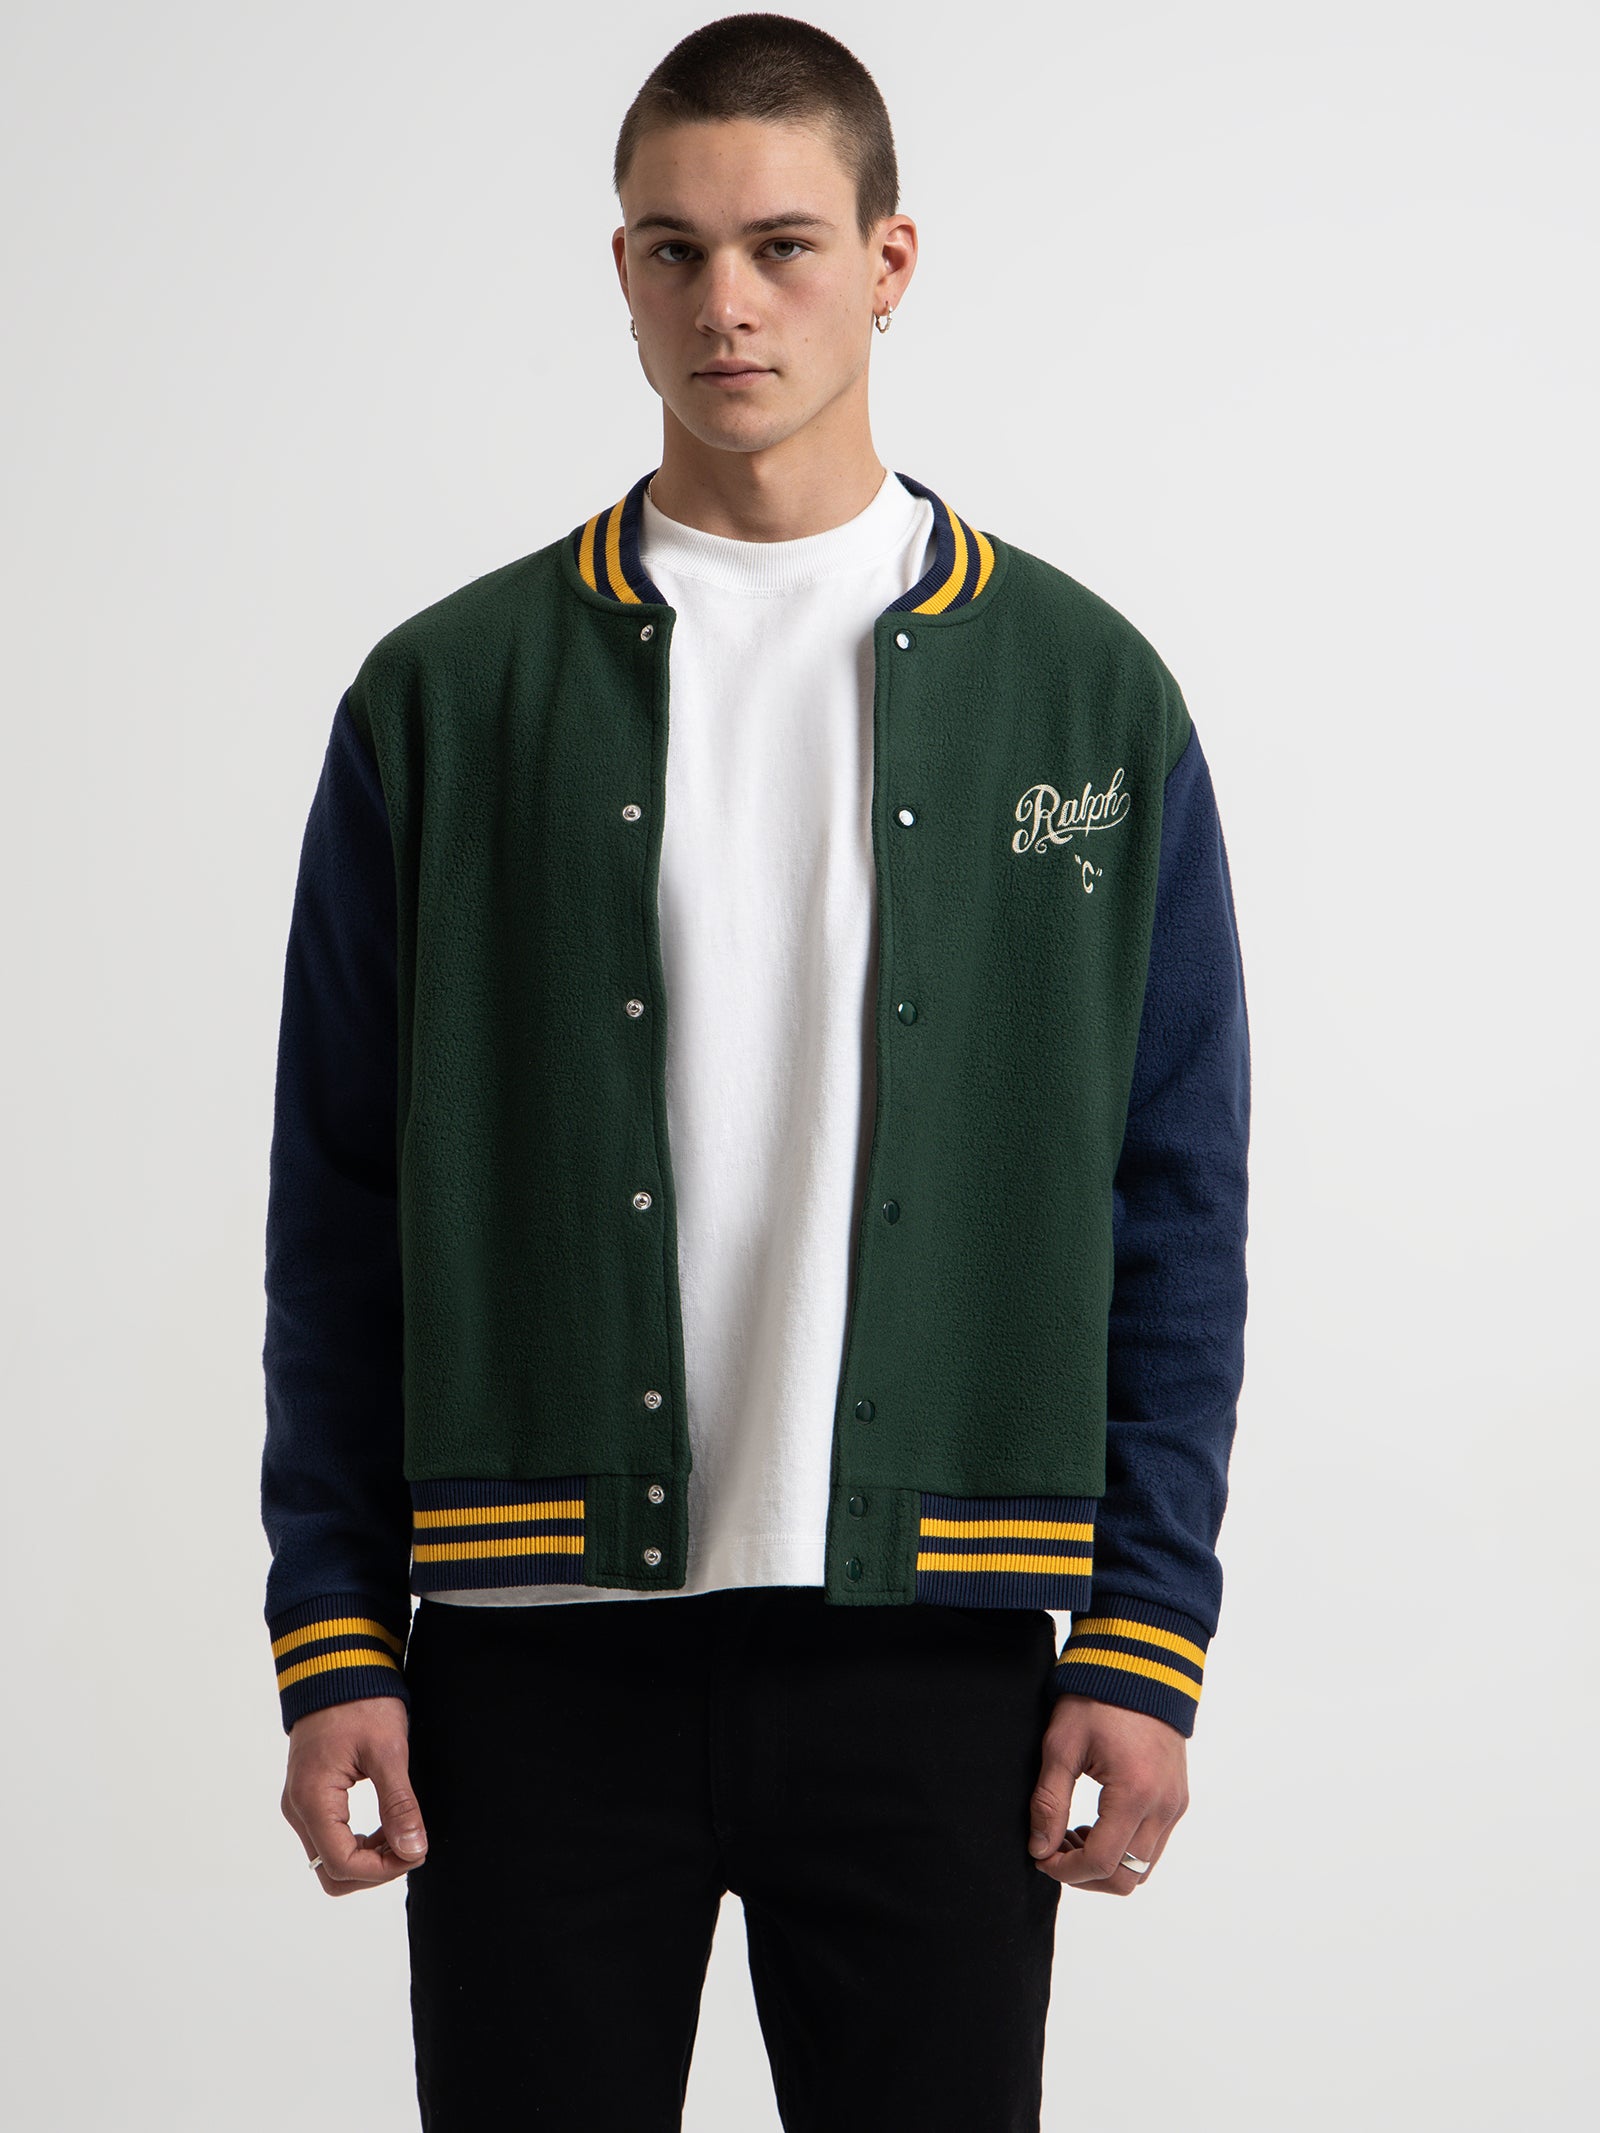 Athletic Department Varsity Jacket in College Green - Glue Store